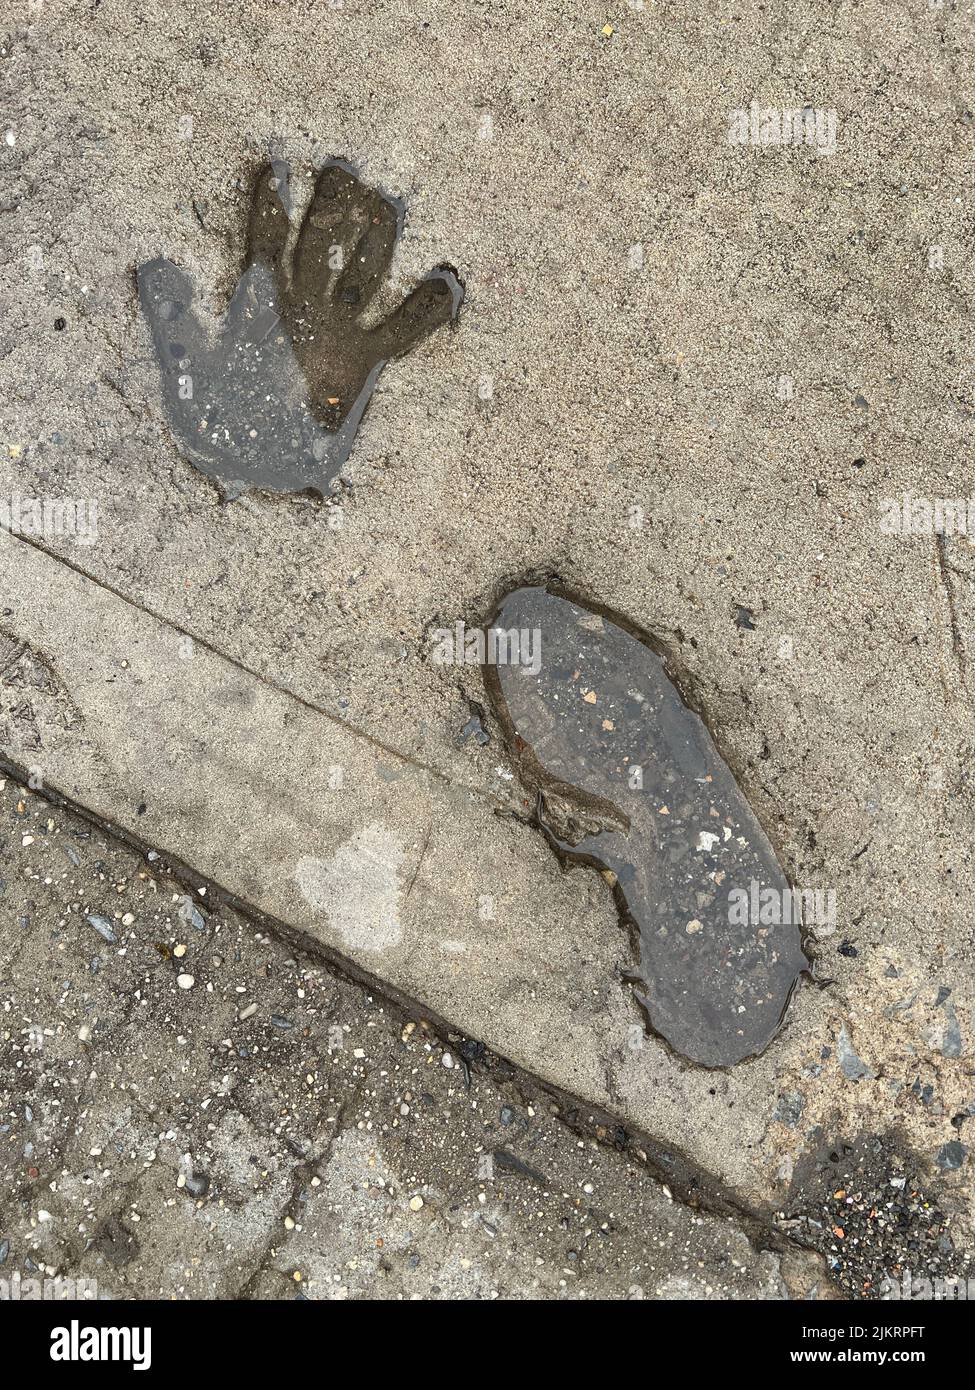 Foot and hand impression in a cement sidewalk in Brooklyn, New York, Stock Photo